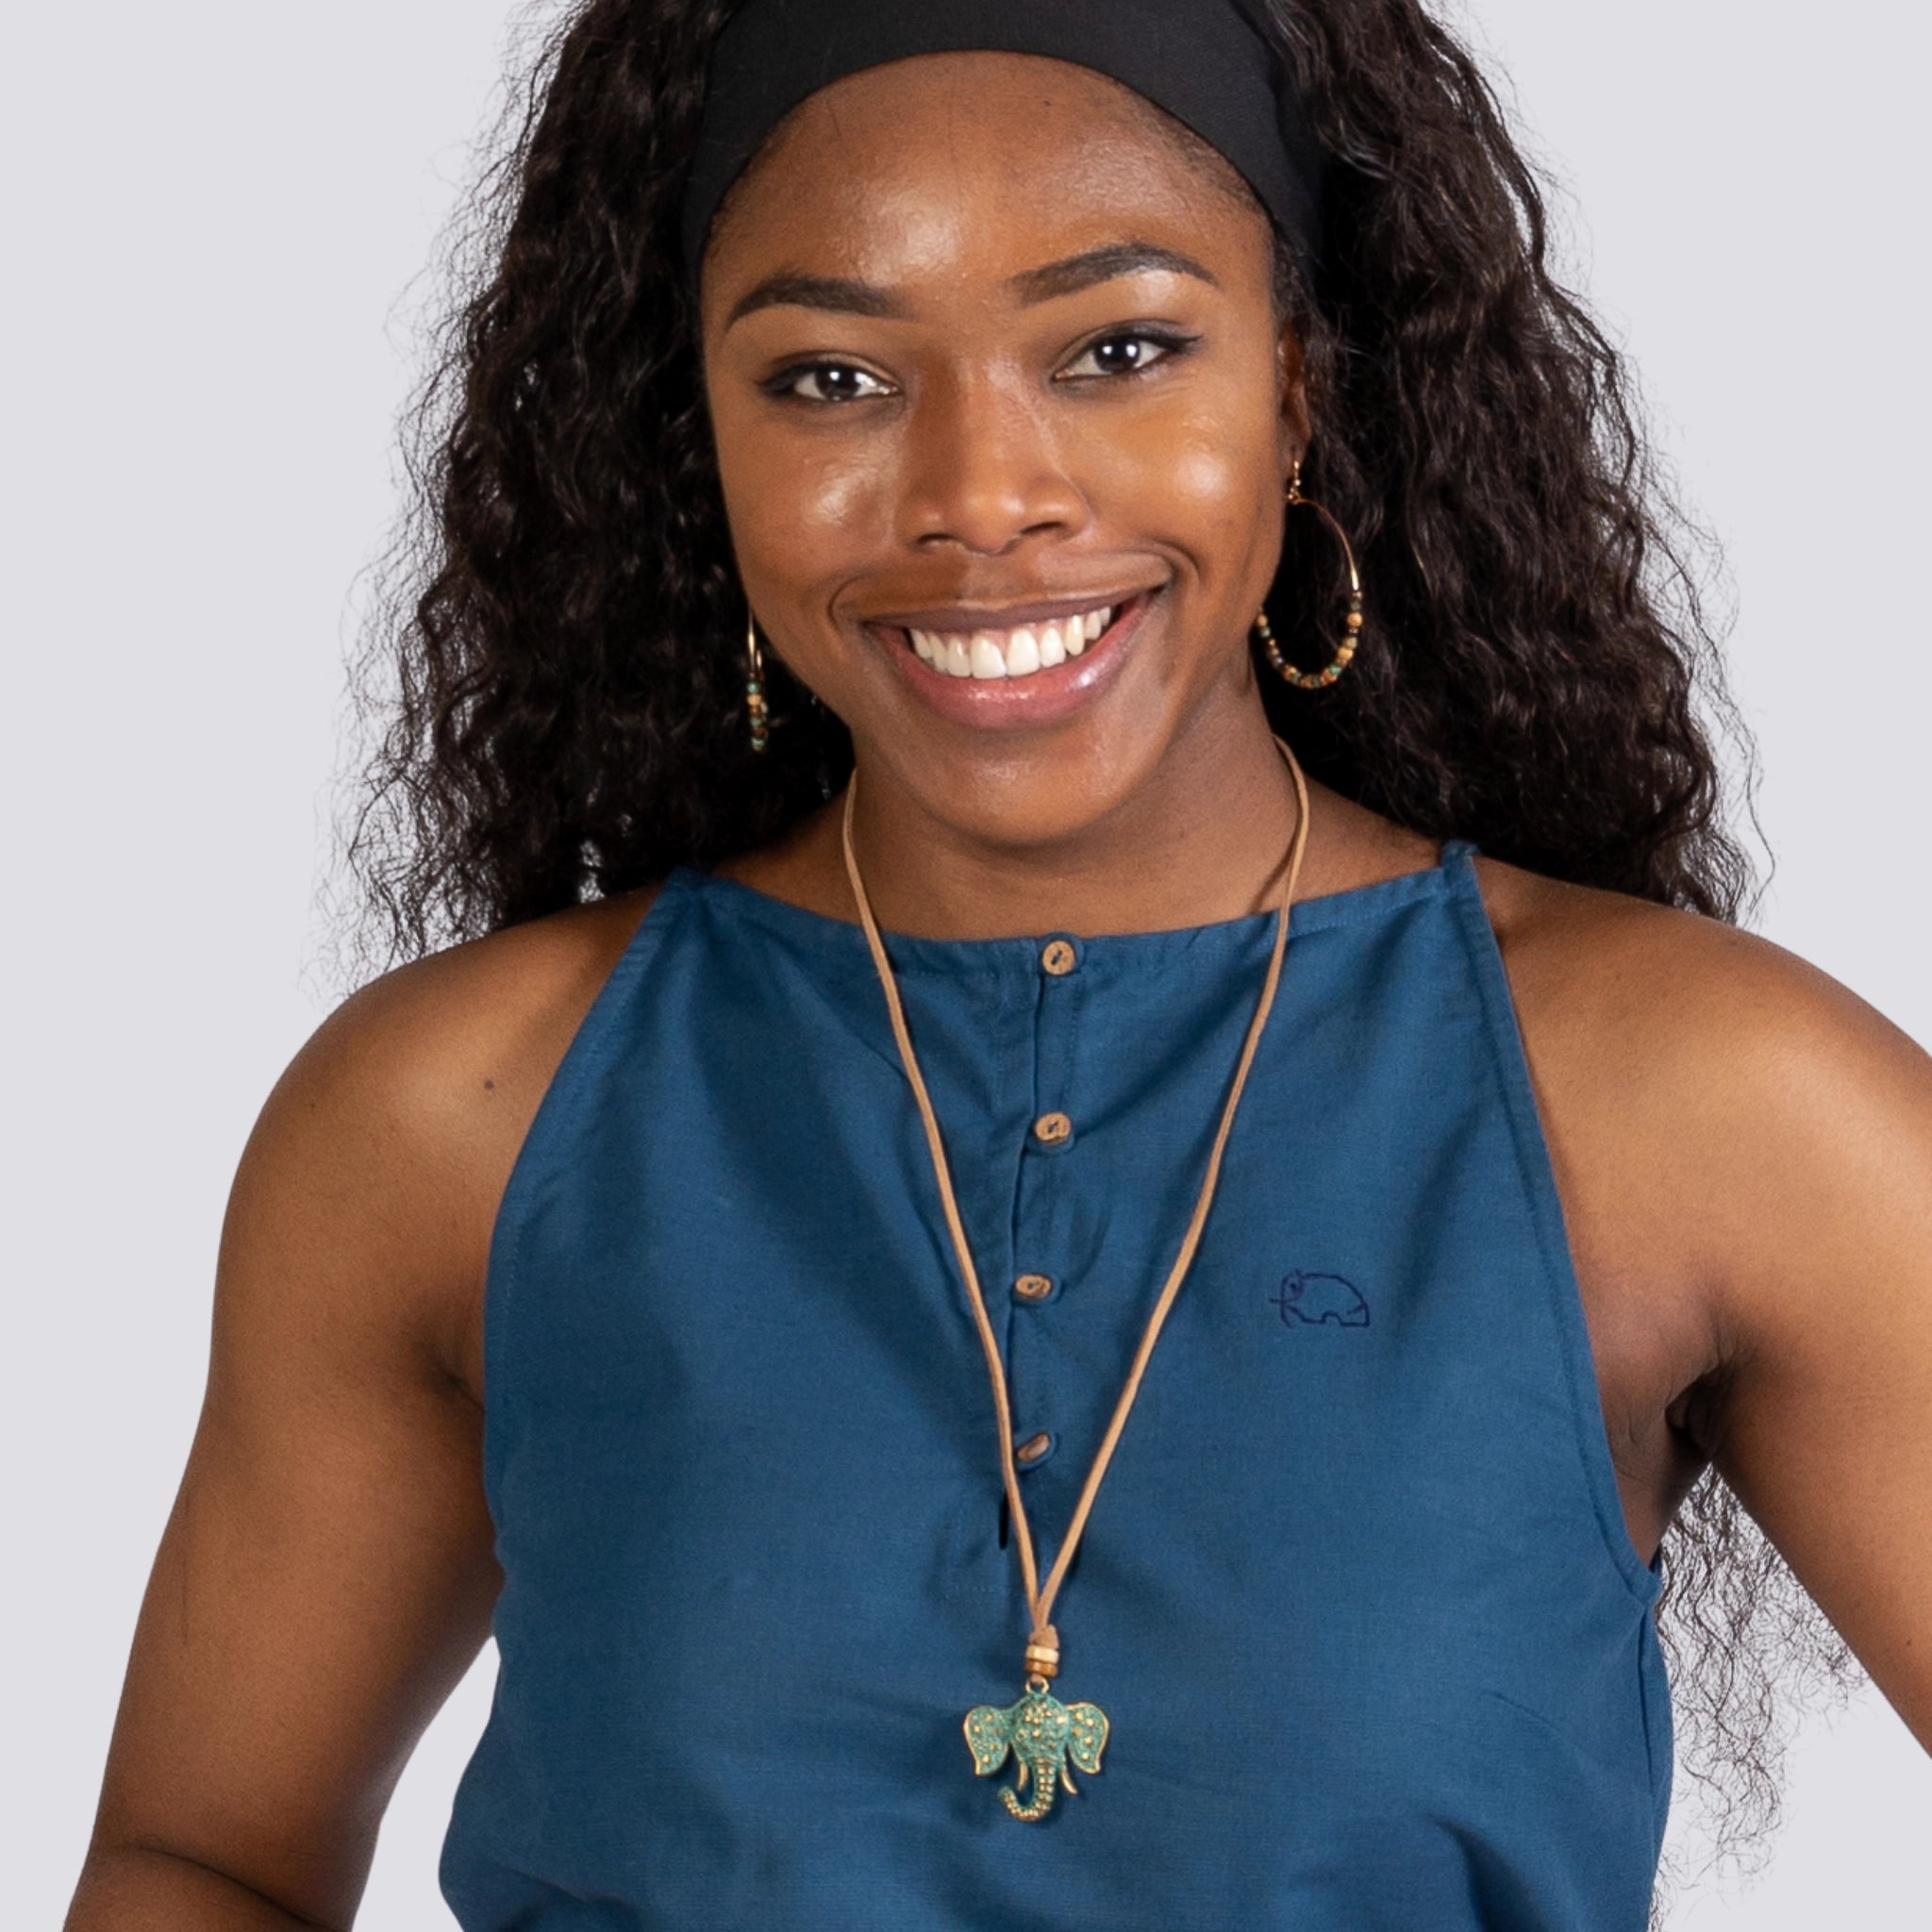 A smiling woman with a headband, wearing a Karee Indigo Twilight Halter Cami Top for Women, hoop earrings, and a necklace with a green pendant.